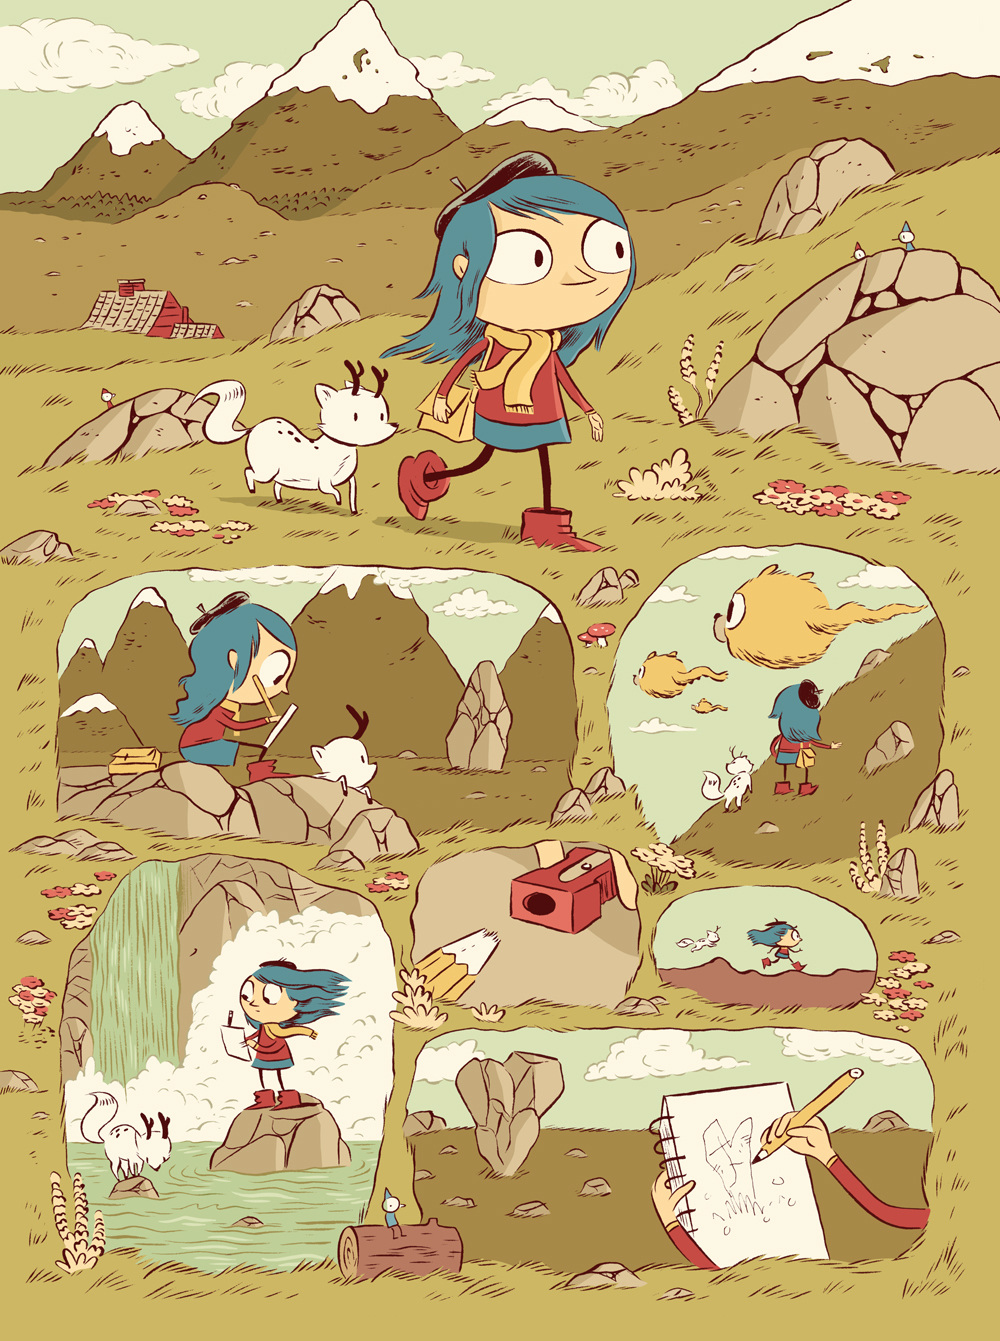 Hilda and the Troll review